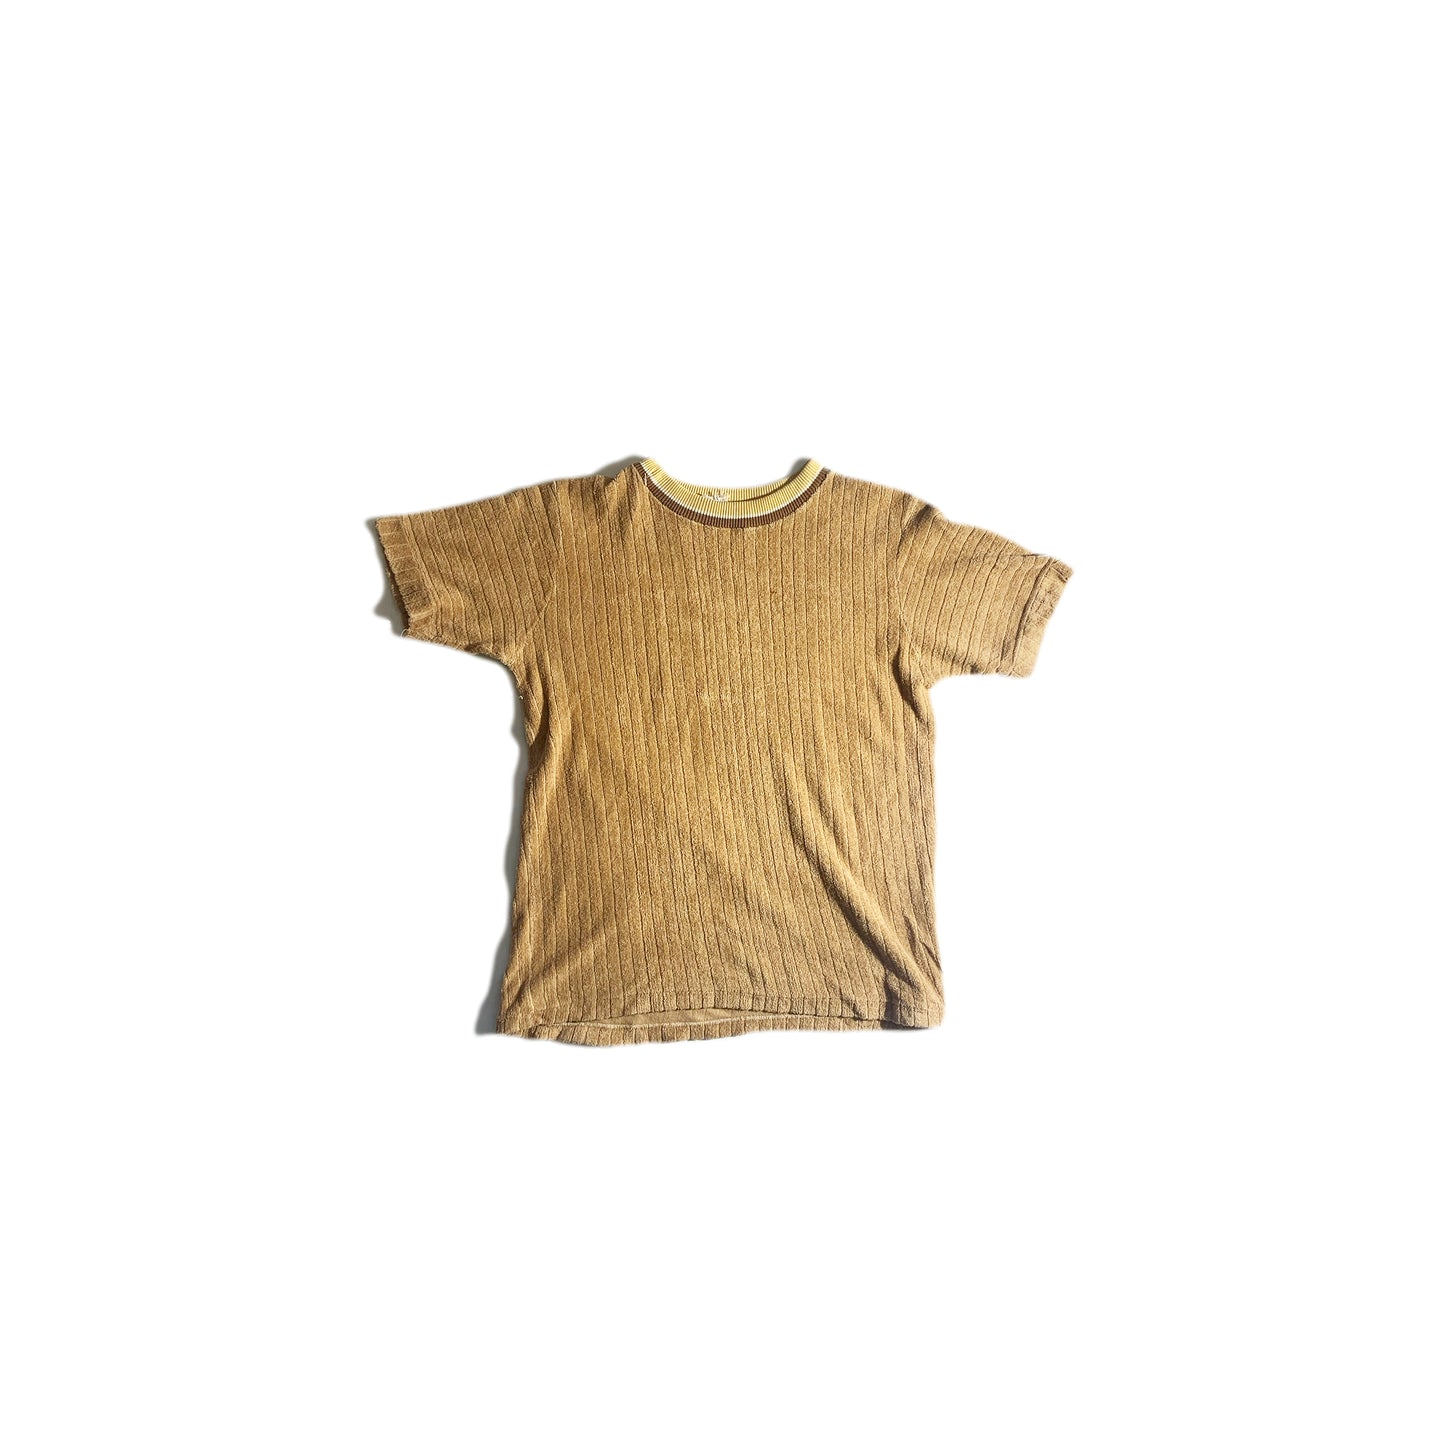 Vintage Terry Cloth Top T-Shirt